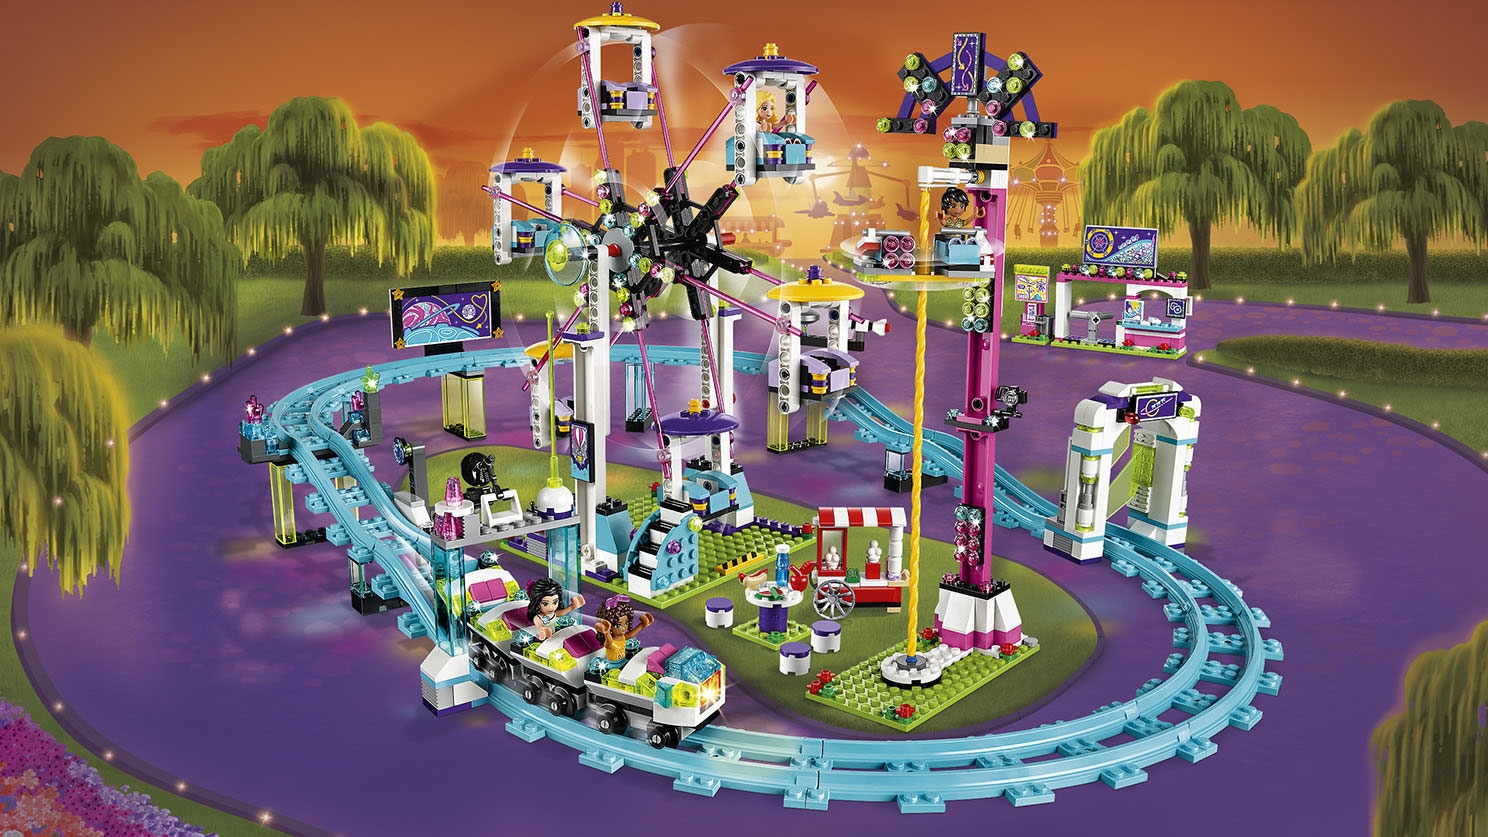 LEGO Friends - 41130 Amusement Park Roller Coast - Take a ride in the roller coaster, the ferris wheel or the spinning drop tower at the amusement park!